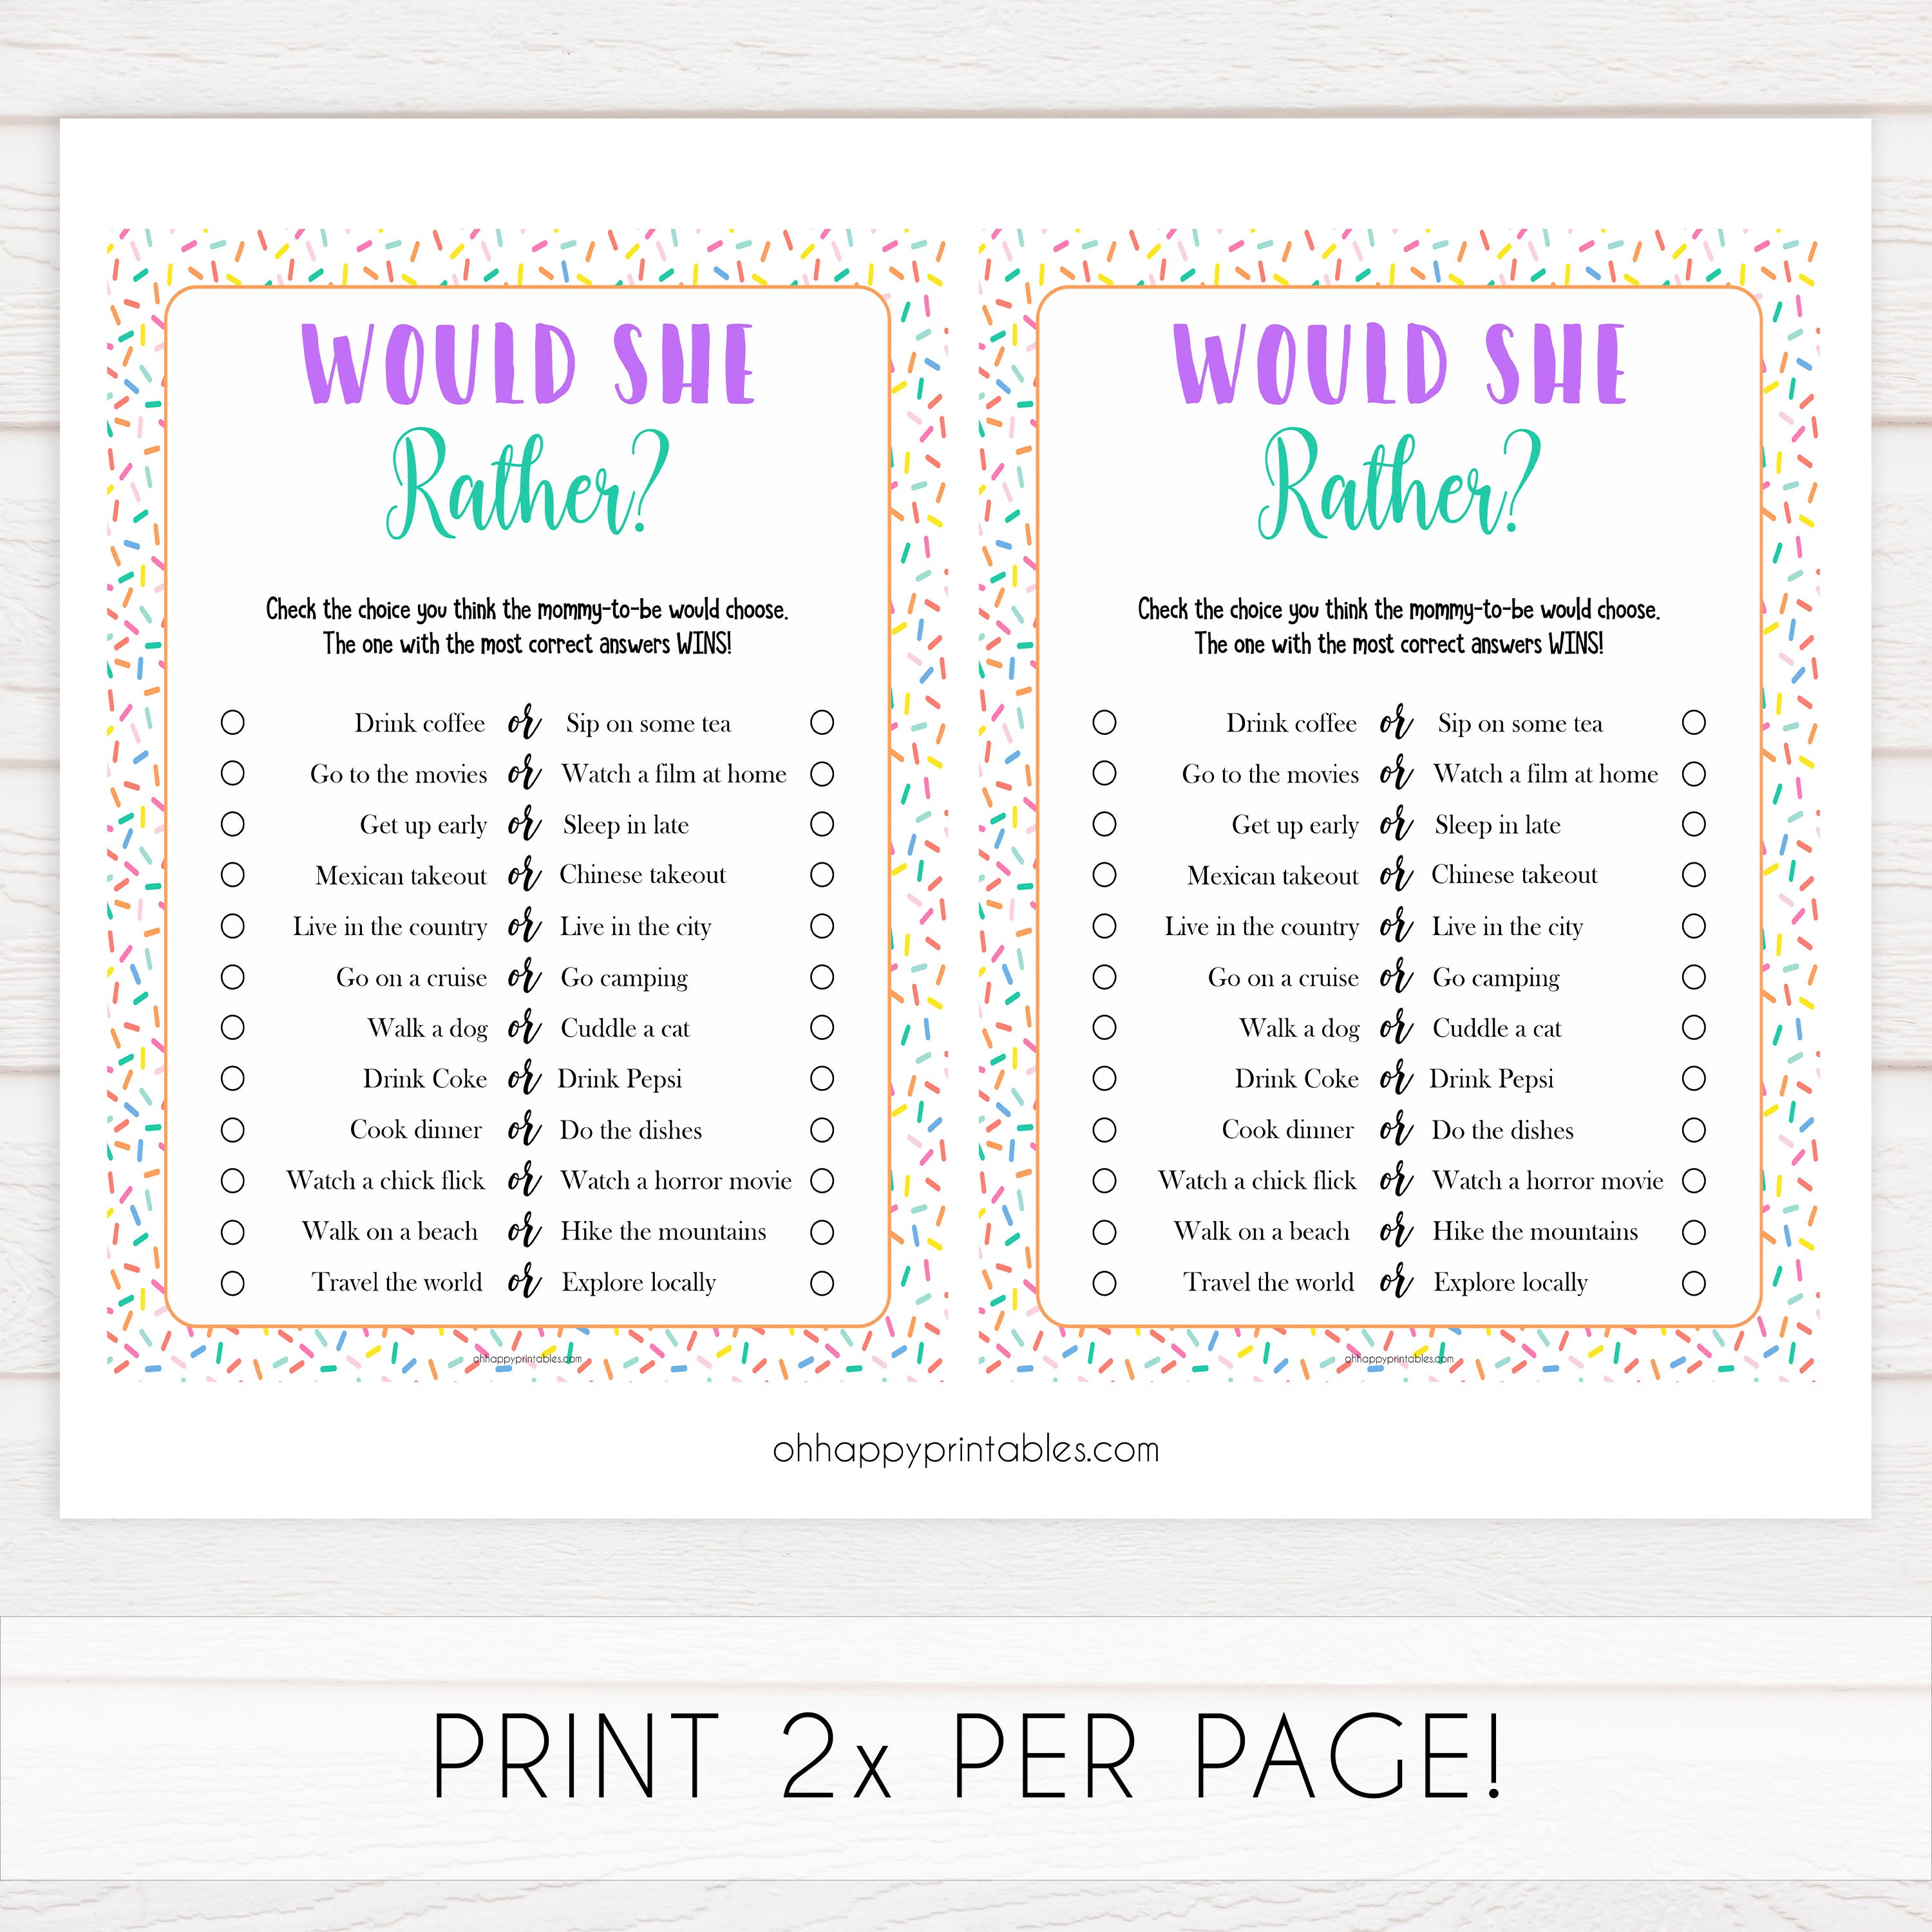 would she rather baby game, Printable baby shower games, baby sprinkle fun baby games, baby shower games, fun baby shower ideas, top baby shower ideas, sprinkle shower baby shower, friends baby shower ideas